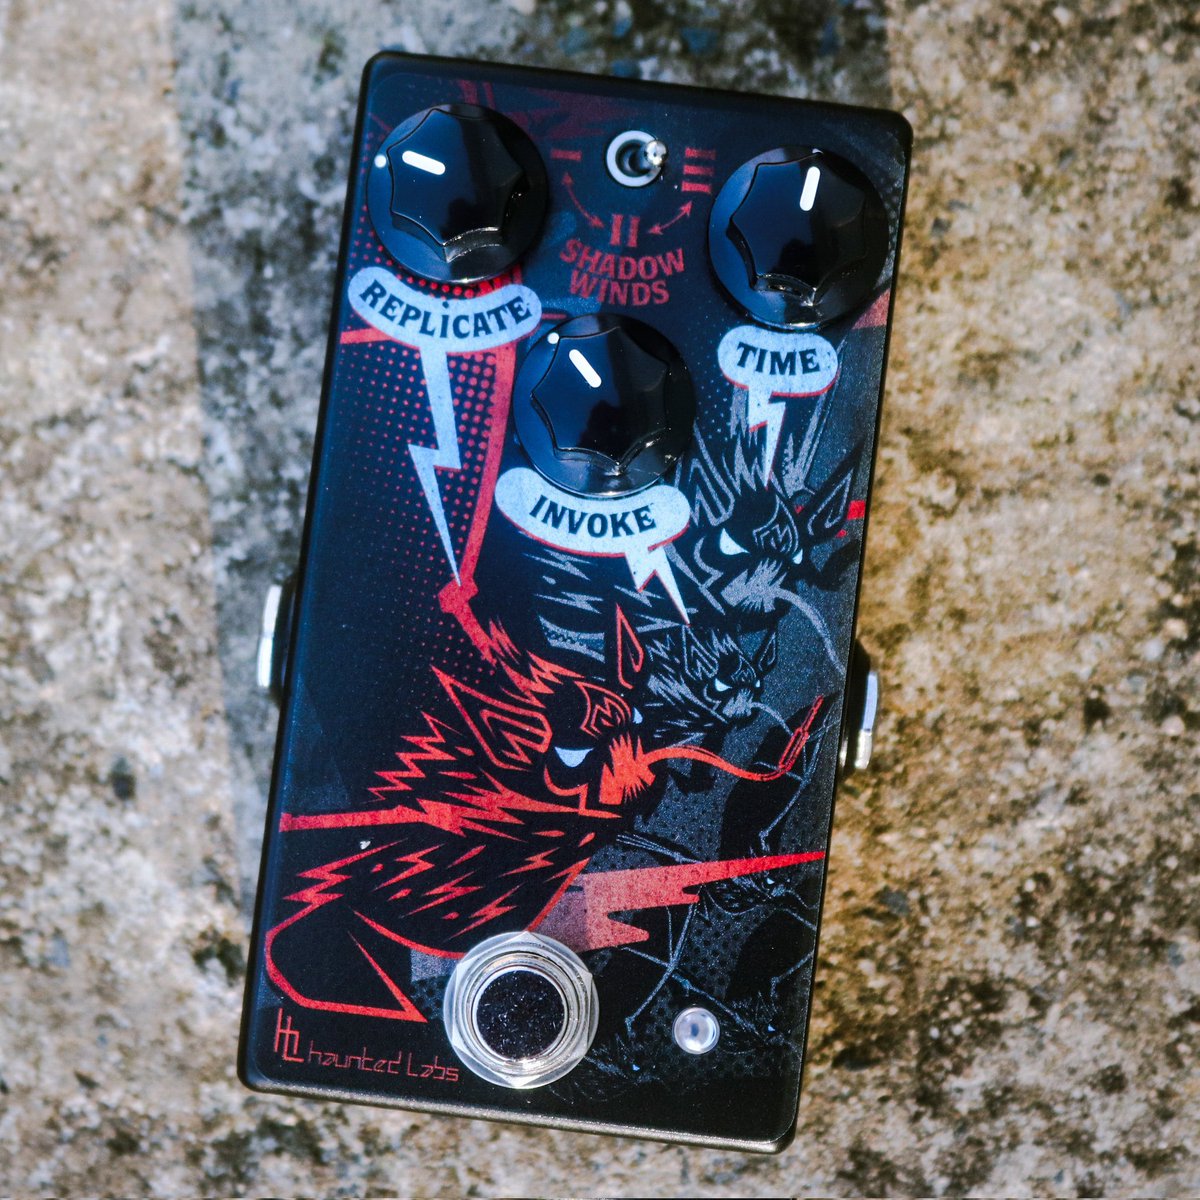 Delay before or after reverb? Okay let's just get crazy with it - before or after distortion? 👀

#HauntedLabs #delay #delaypedal #reverb #reverbpedal #guitarpedals #guitareffects #effectspedals #guitarfx #fxpedals #pedalporn #geartalk #knowyourtone #pedalboard